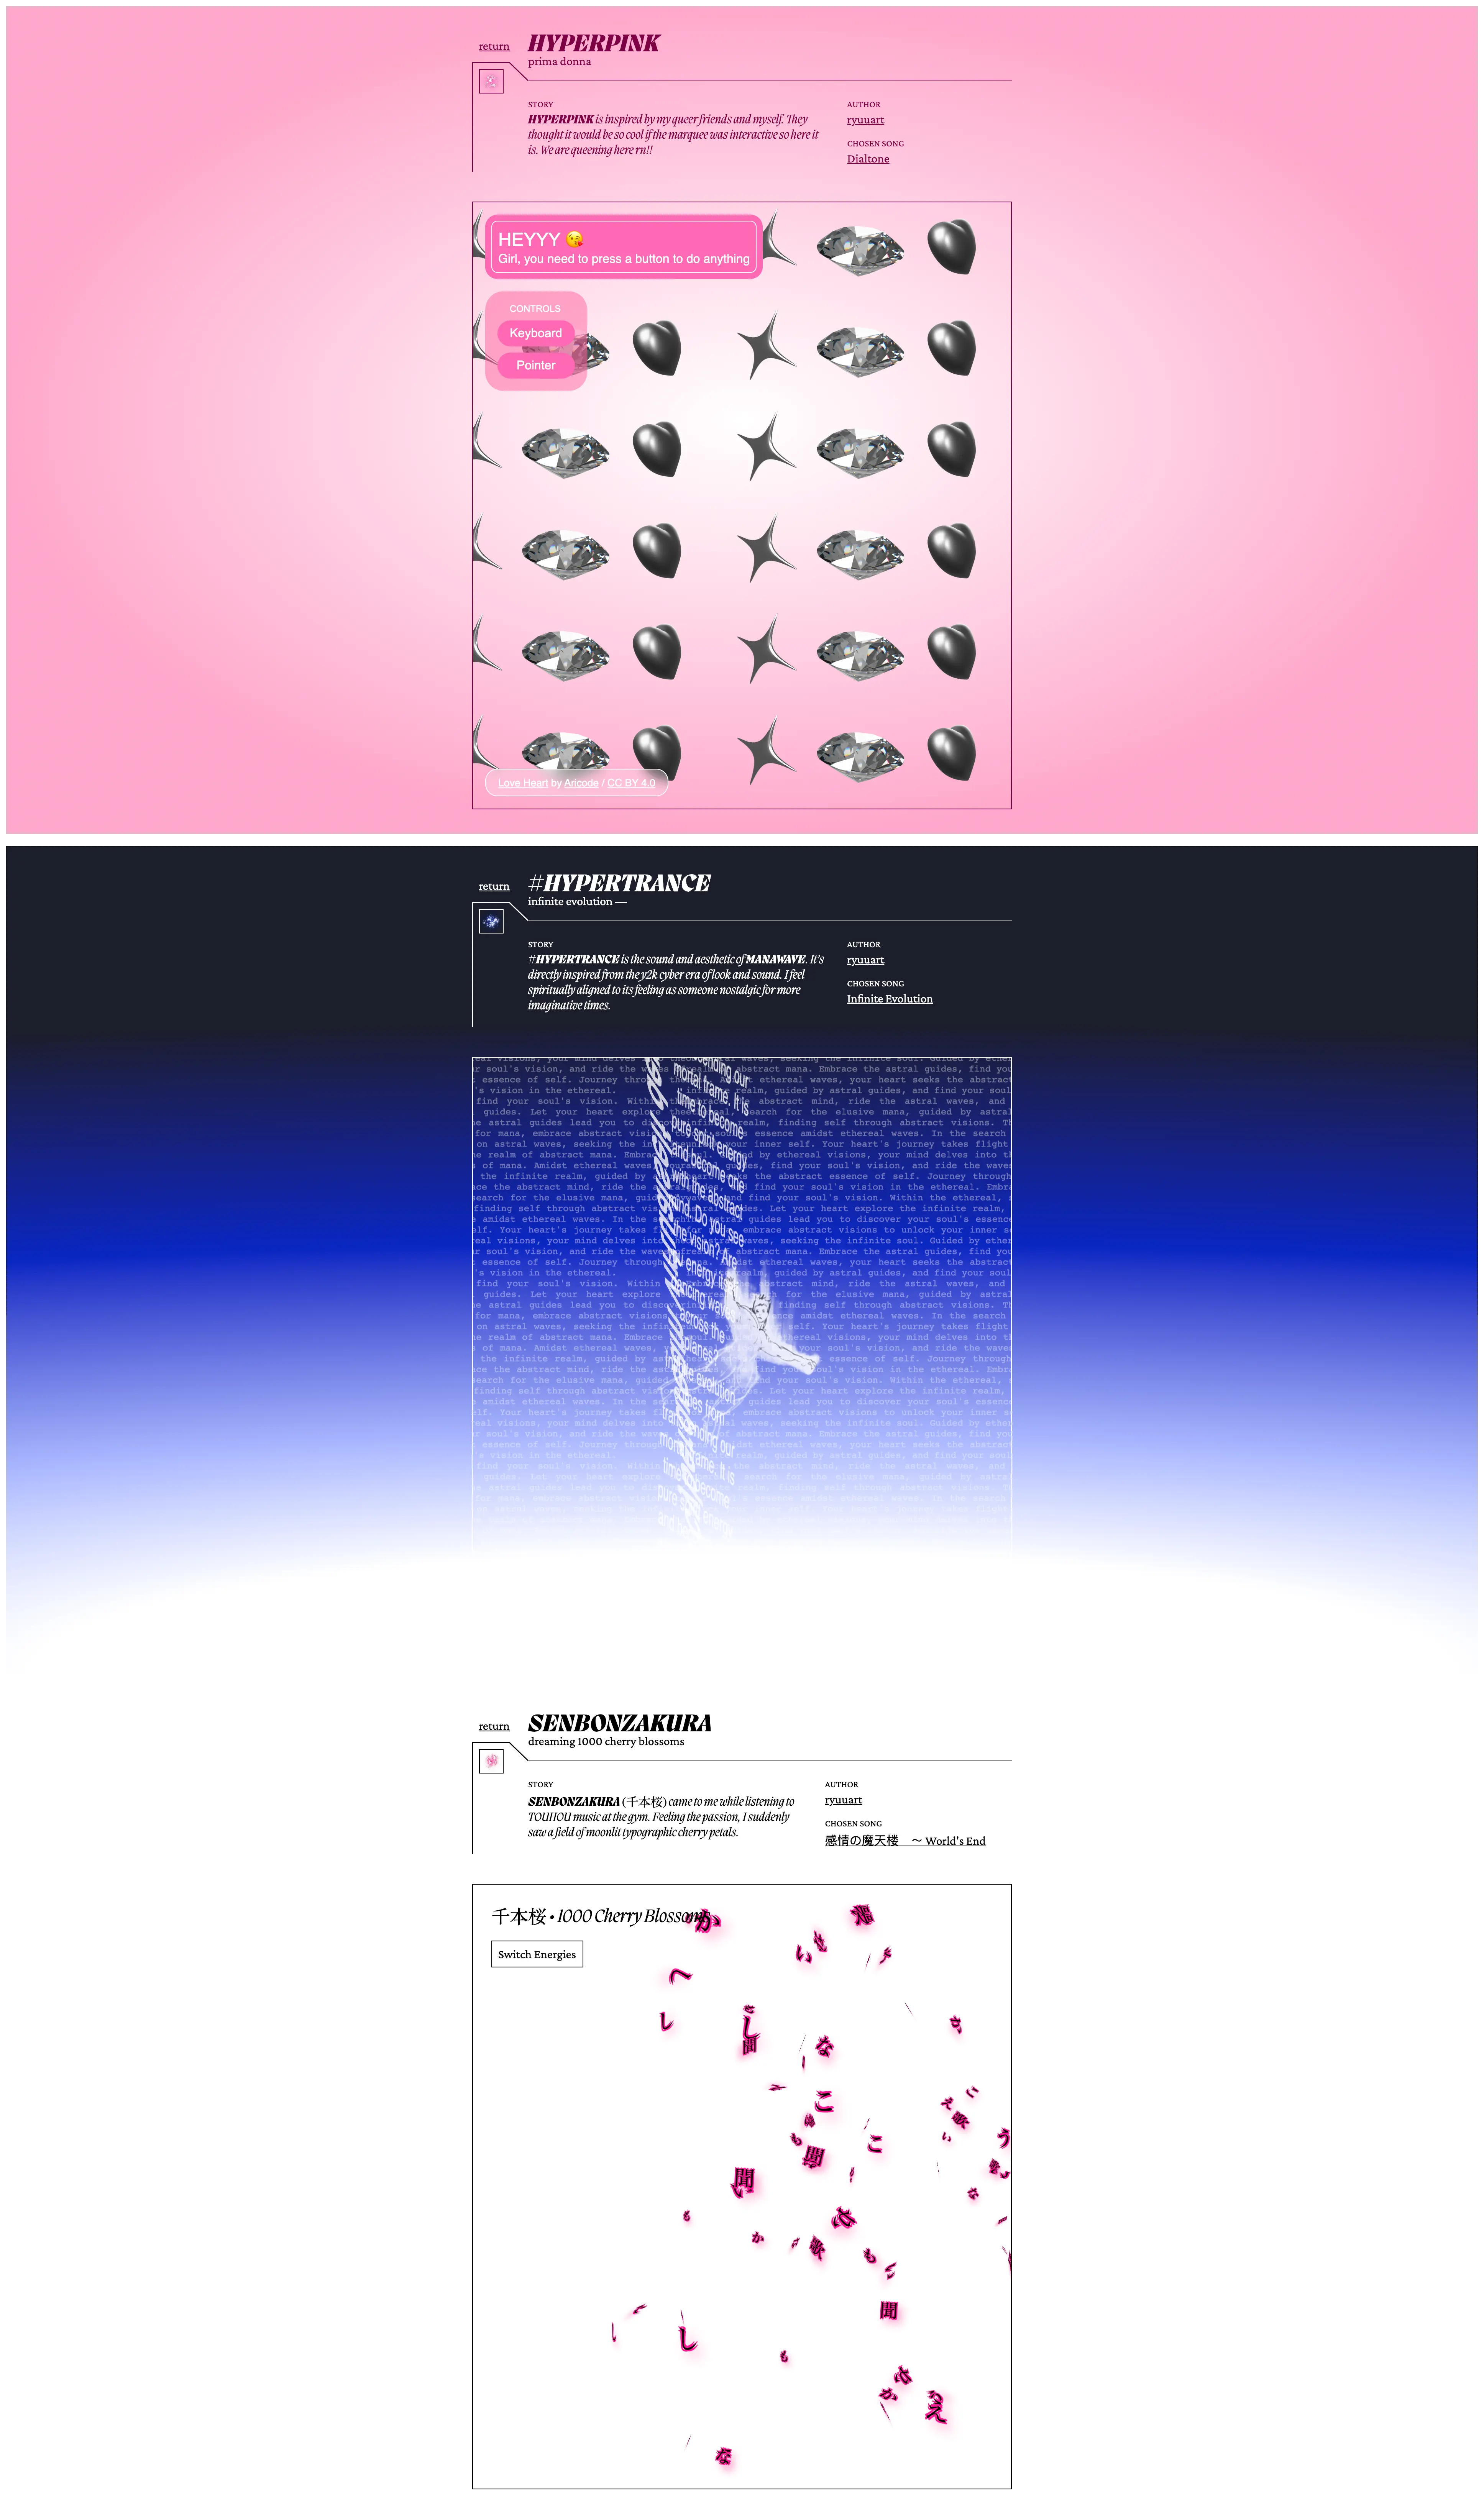 3 subpages of the MANAWAVE site portraying different artistc examples and concepts for MANAWAVE's usage